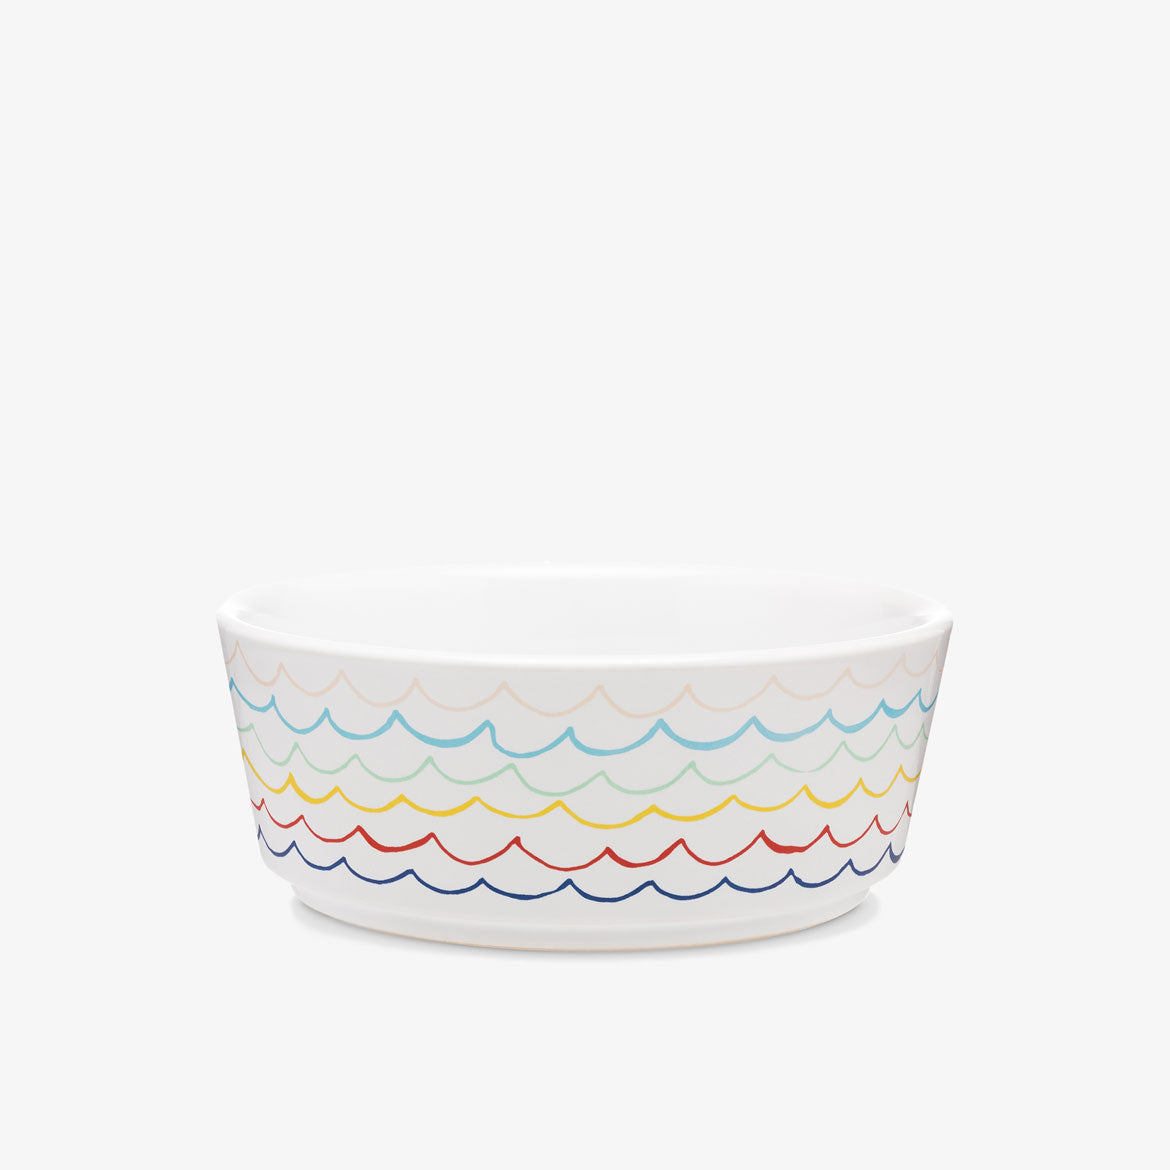 Sketched Wave Ceramic Dog Bowl by Waggo—multi color waves